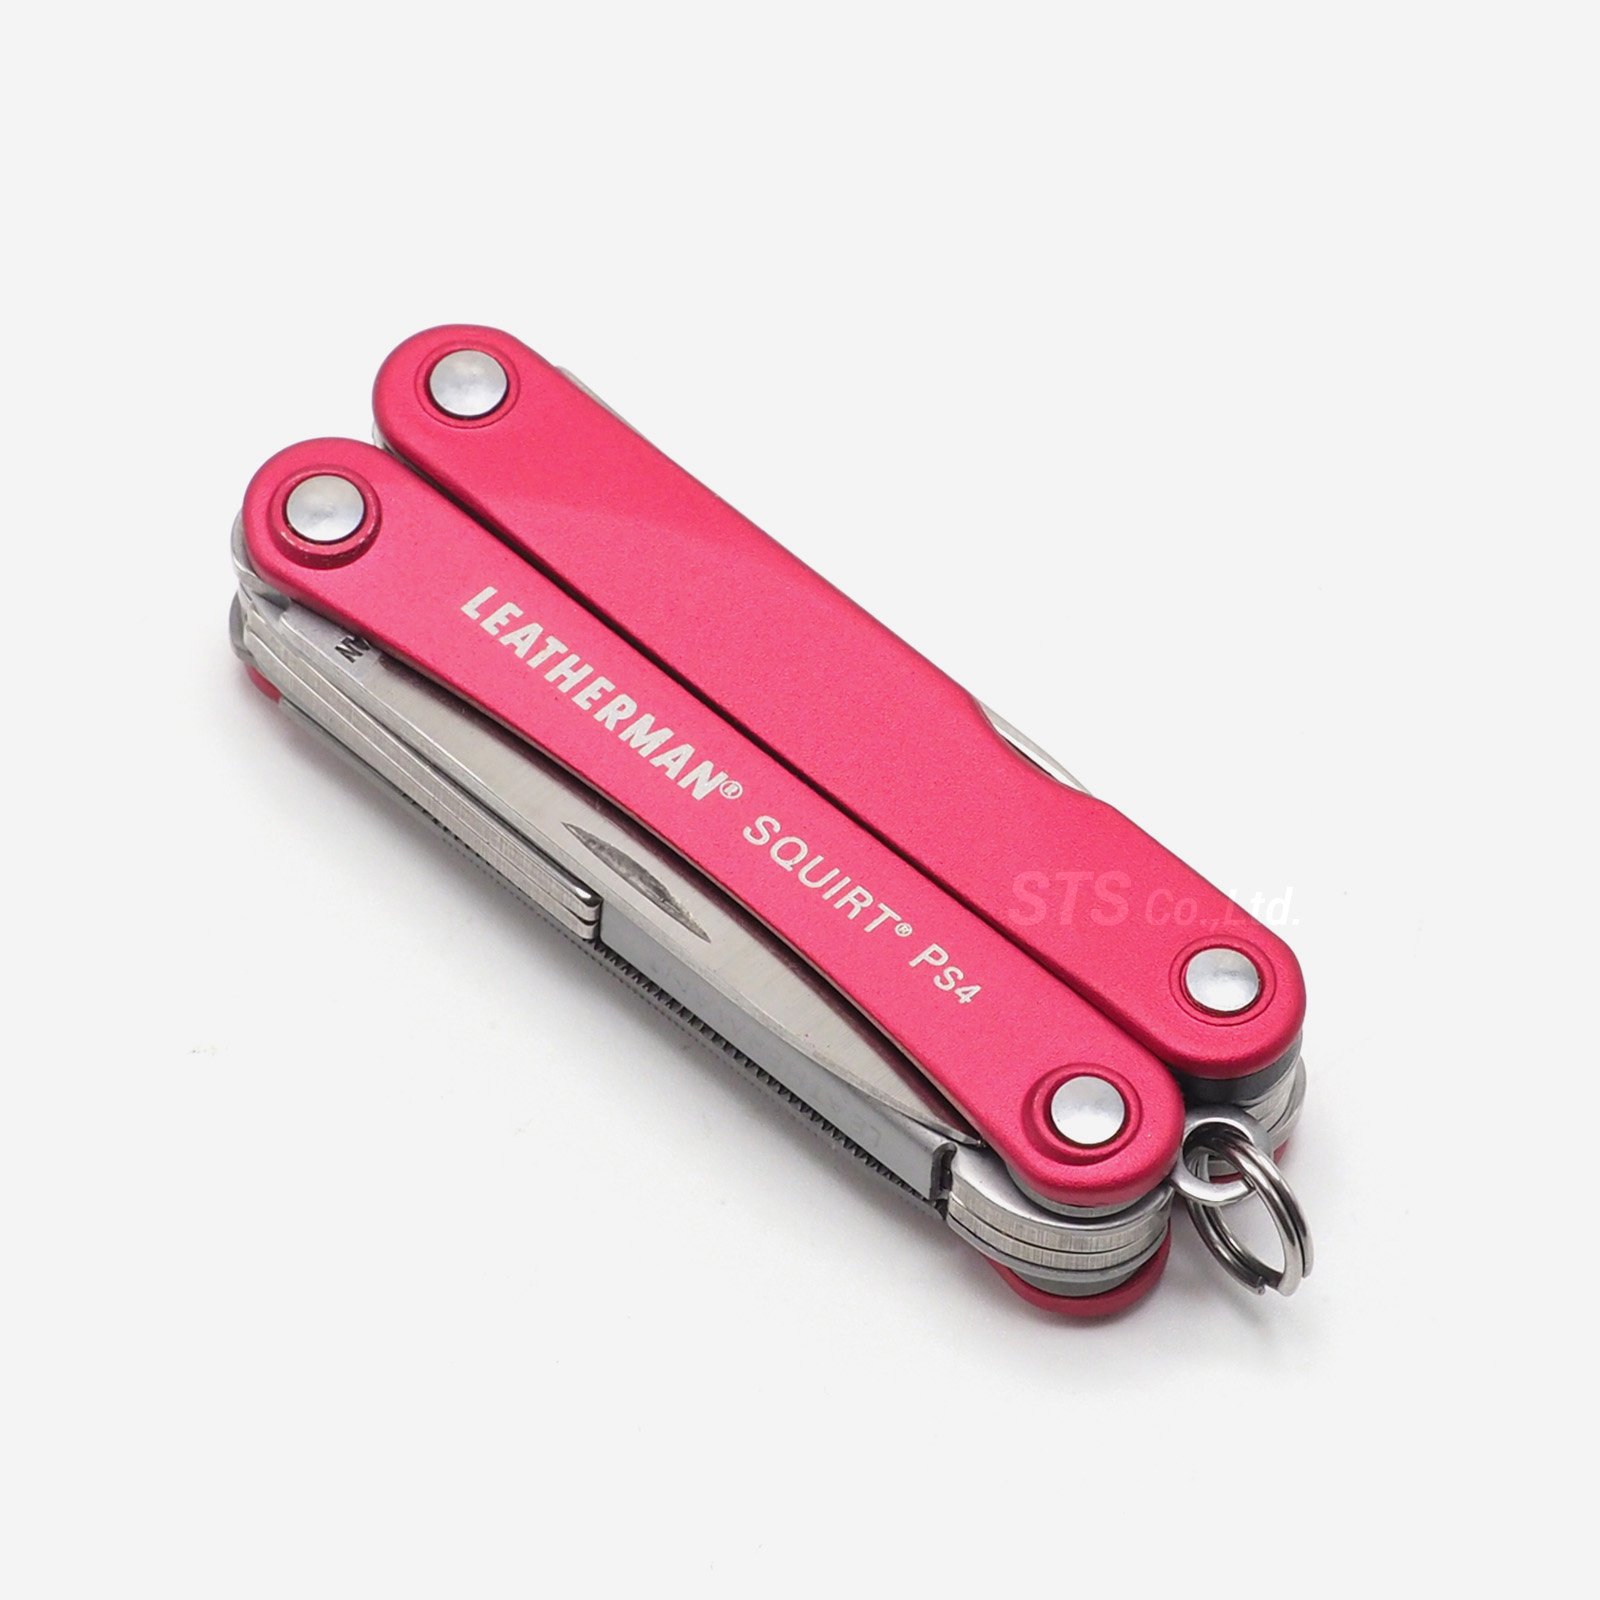 Supreme/Leatherman Squirt PS4 Multitool - ParkSIDER